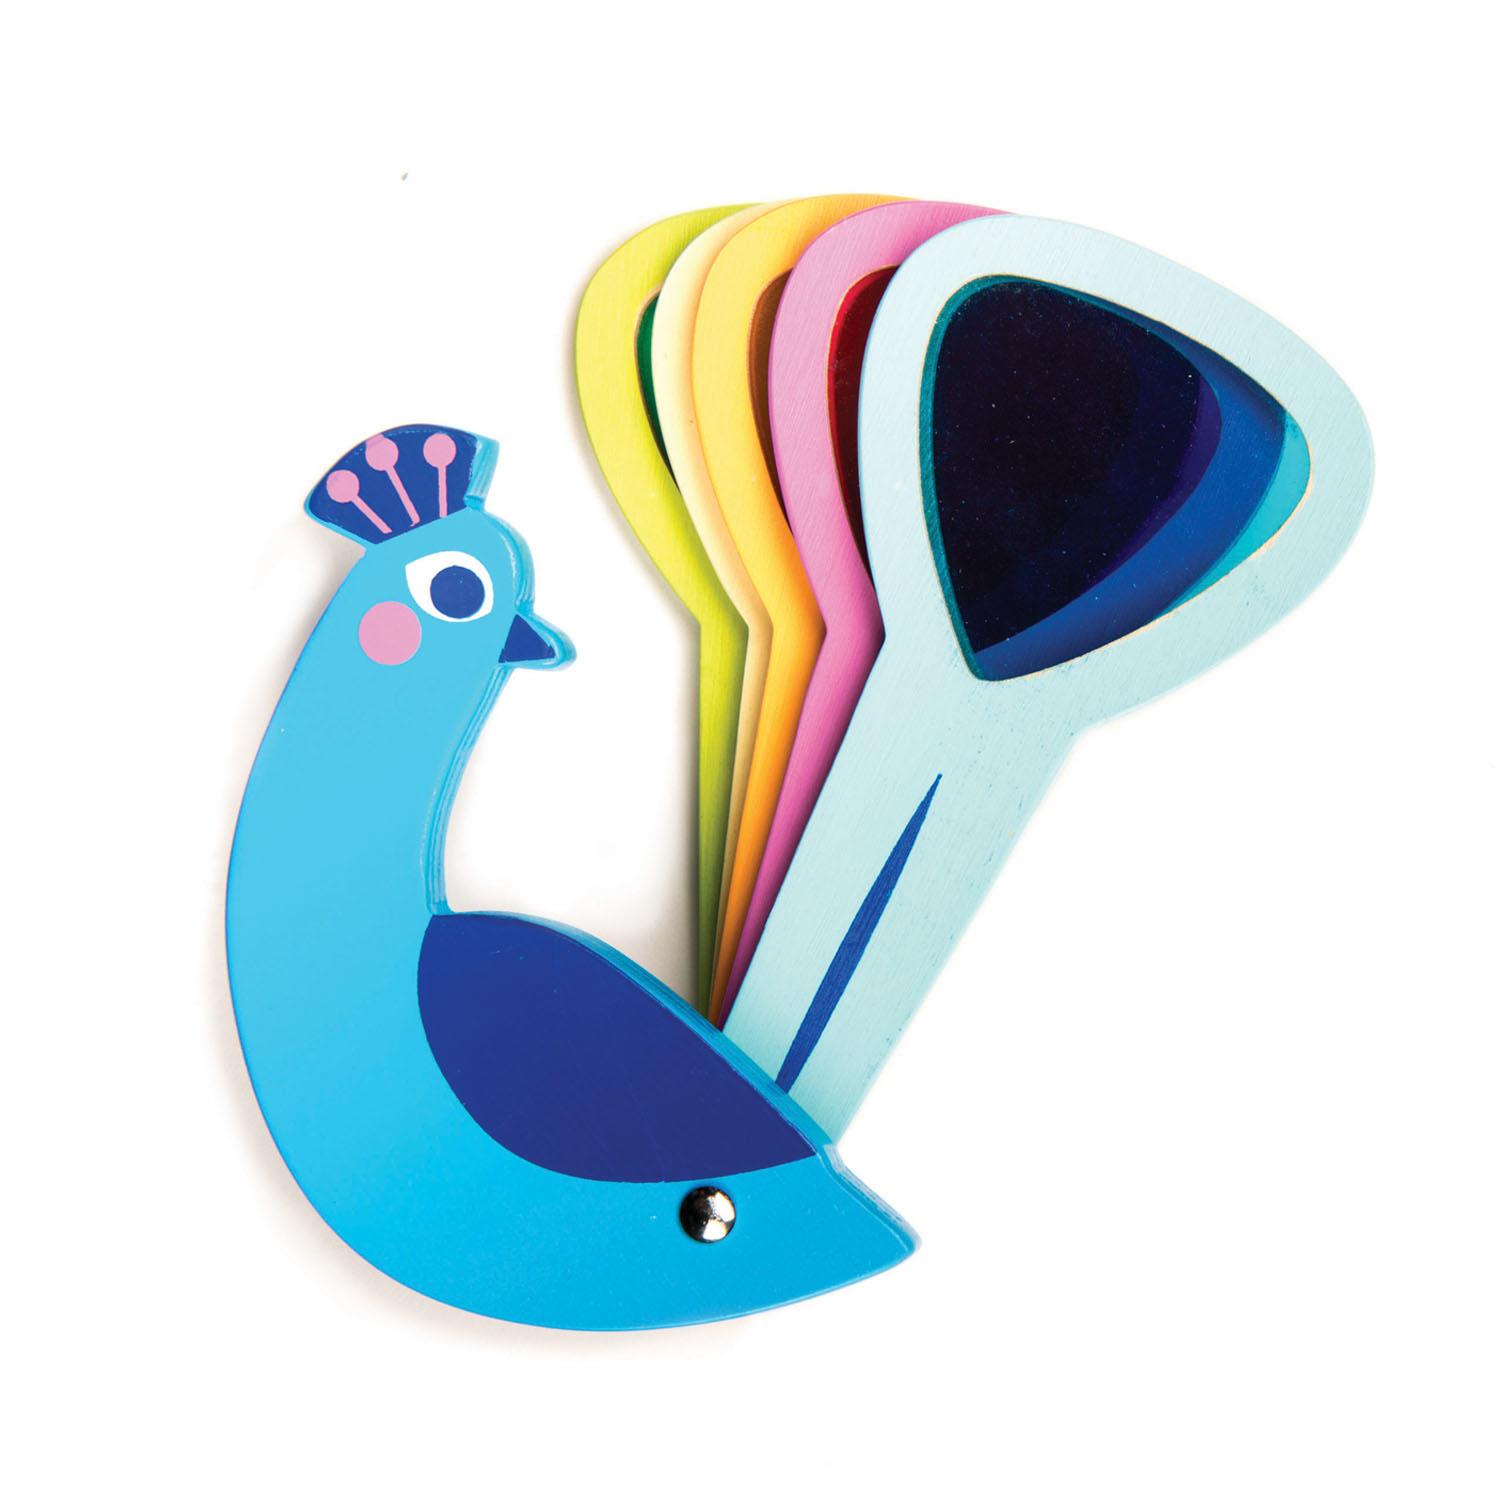 New Wooden Toy Peacock with Acrylic Coloured Tail Feathers #4